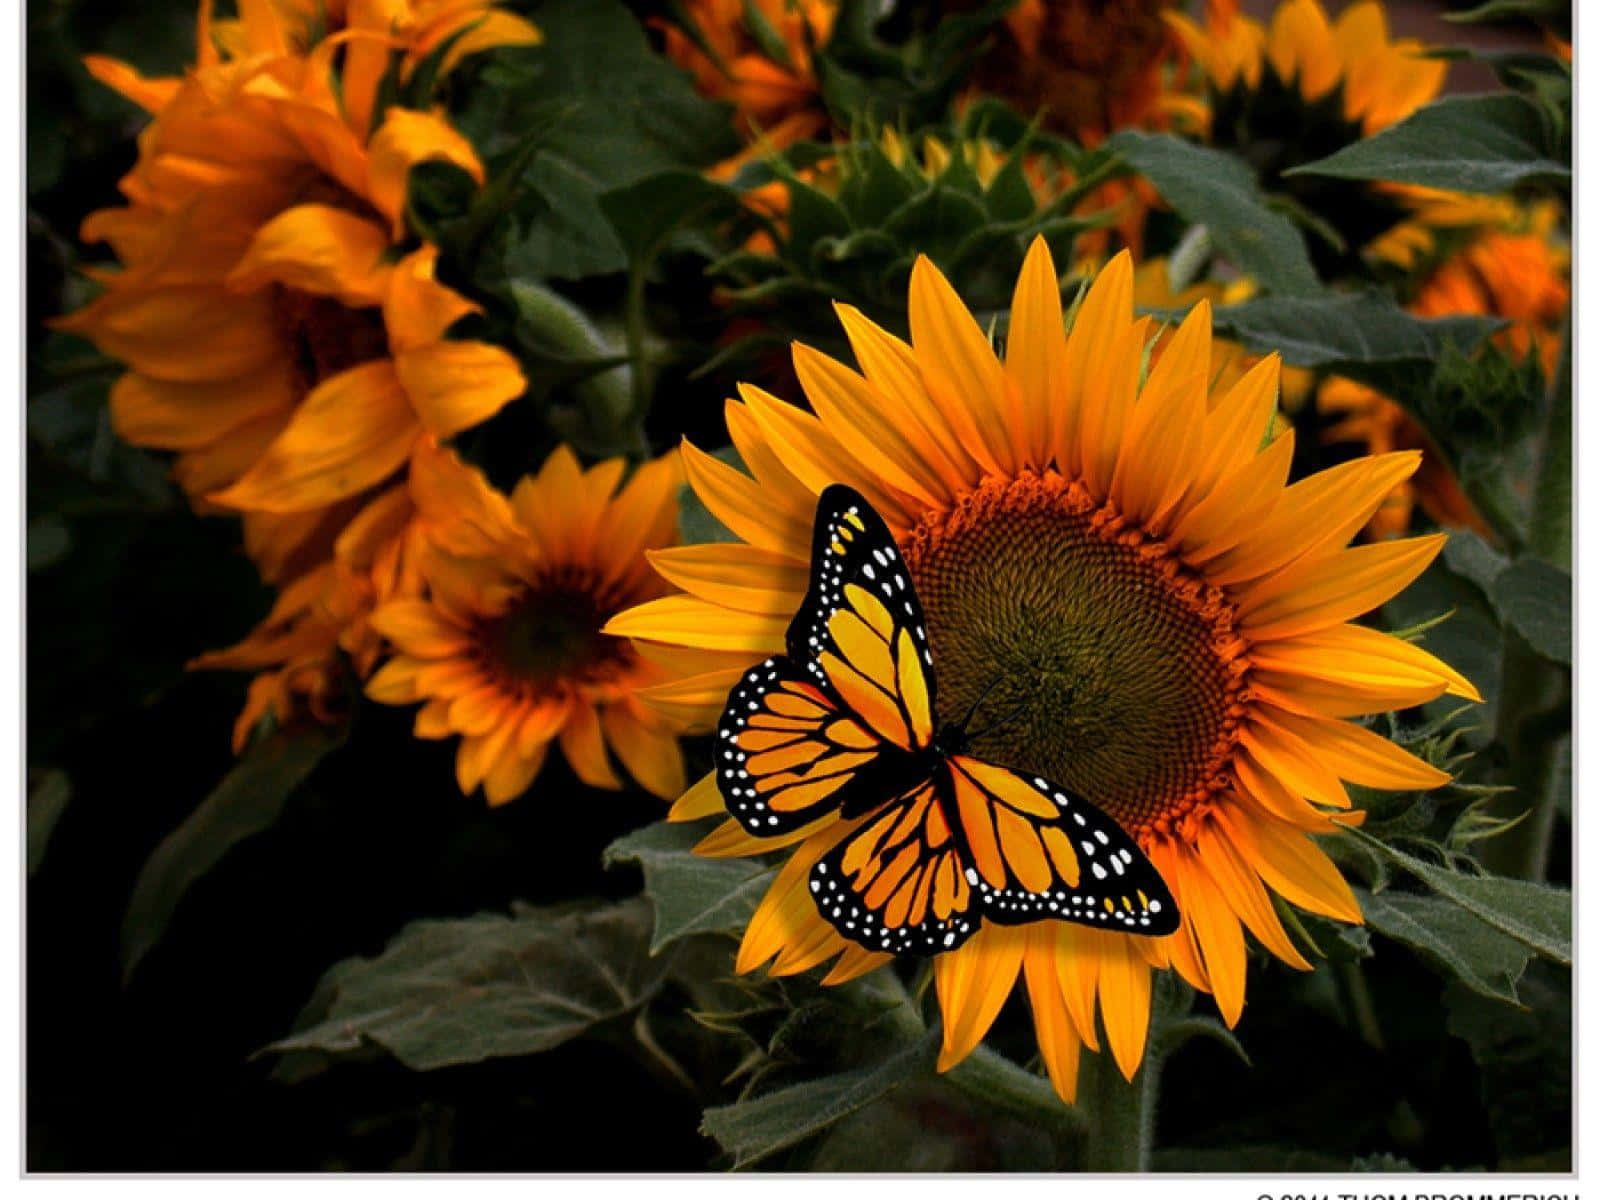 A Monarch Butterfly perched atop a yellow flower